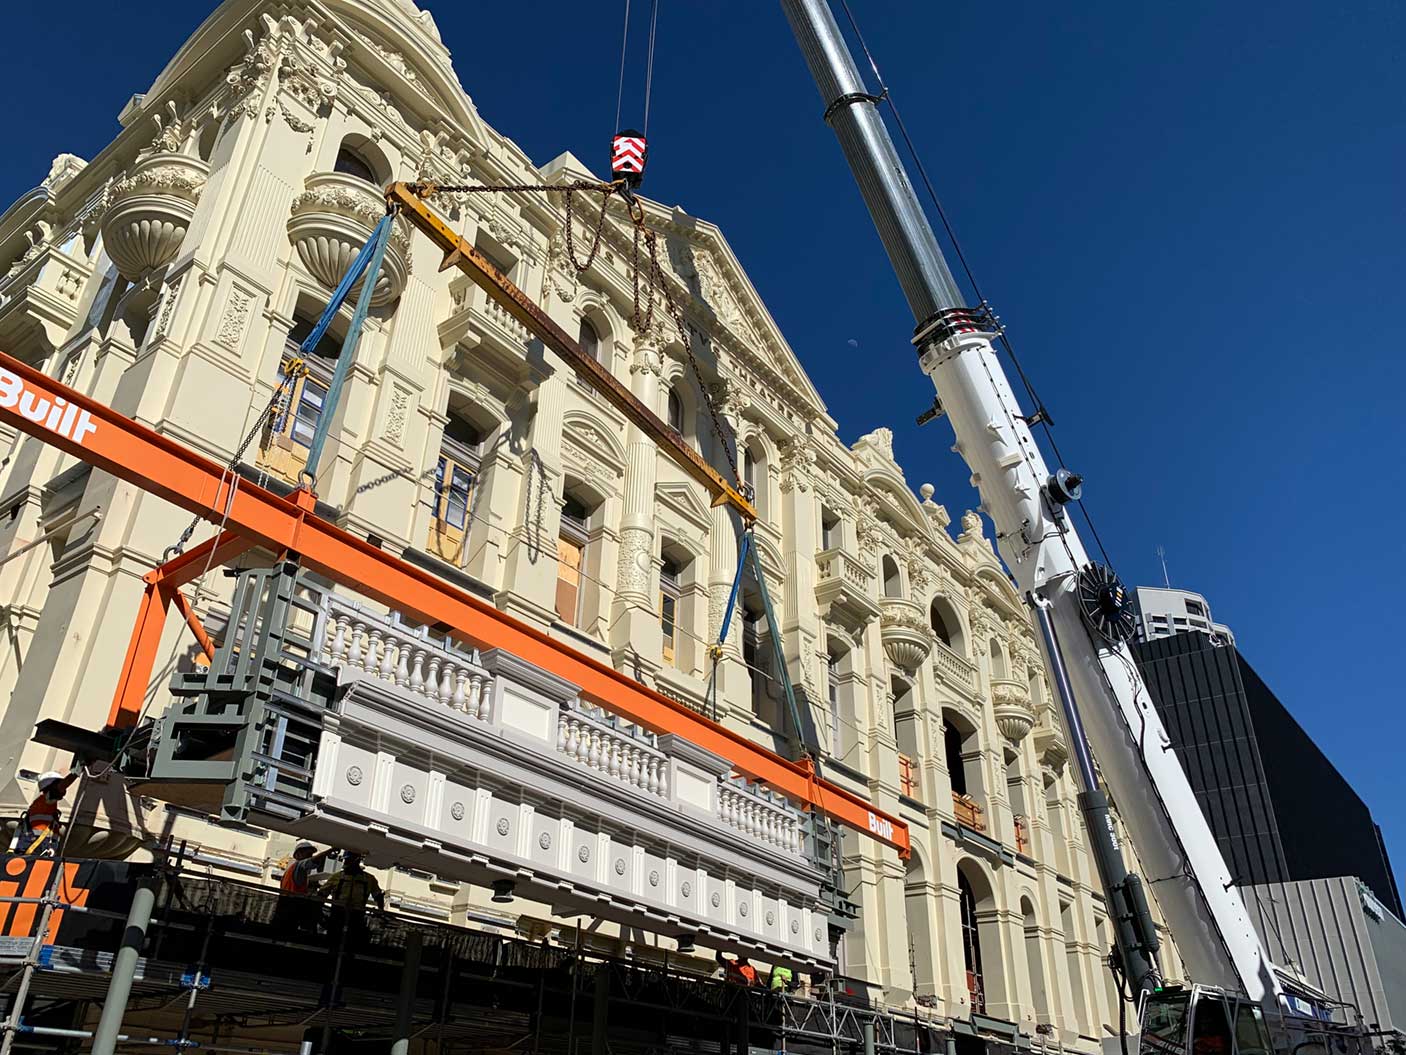 A crane lifting a restored balcony on His Majesty's Theatre